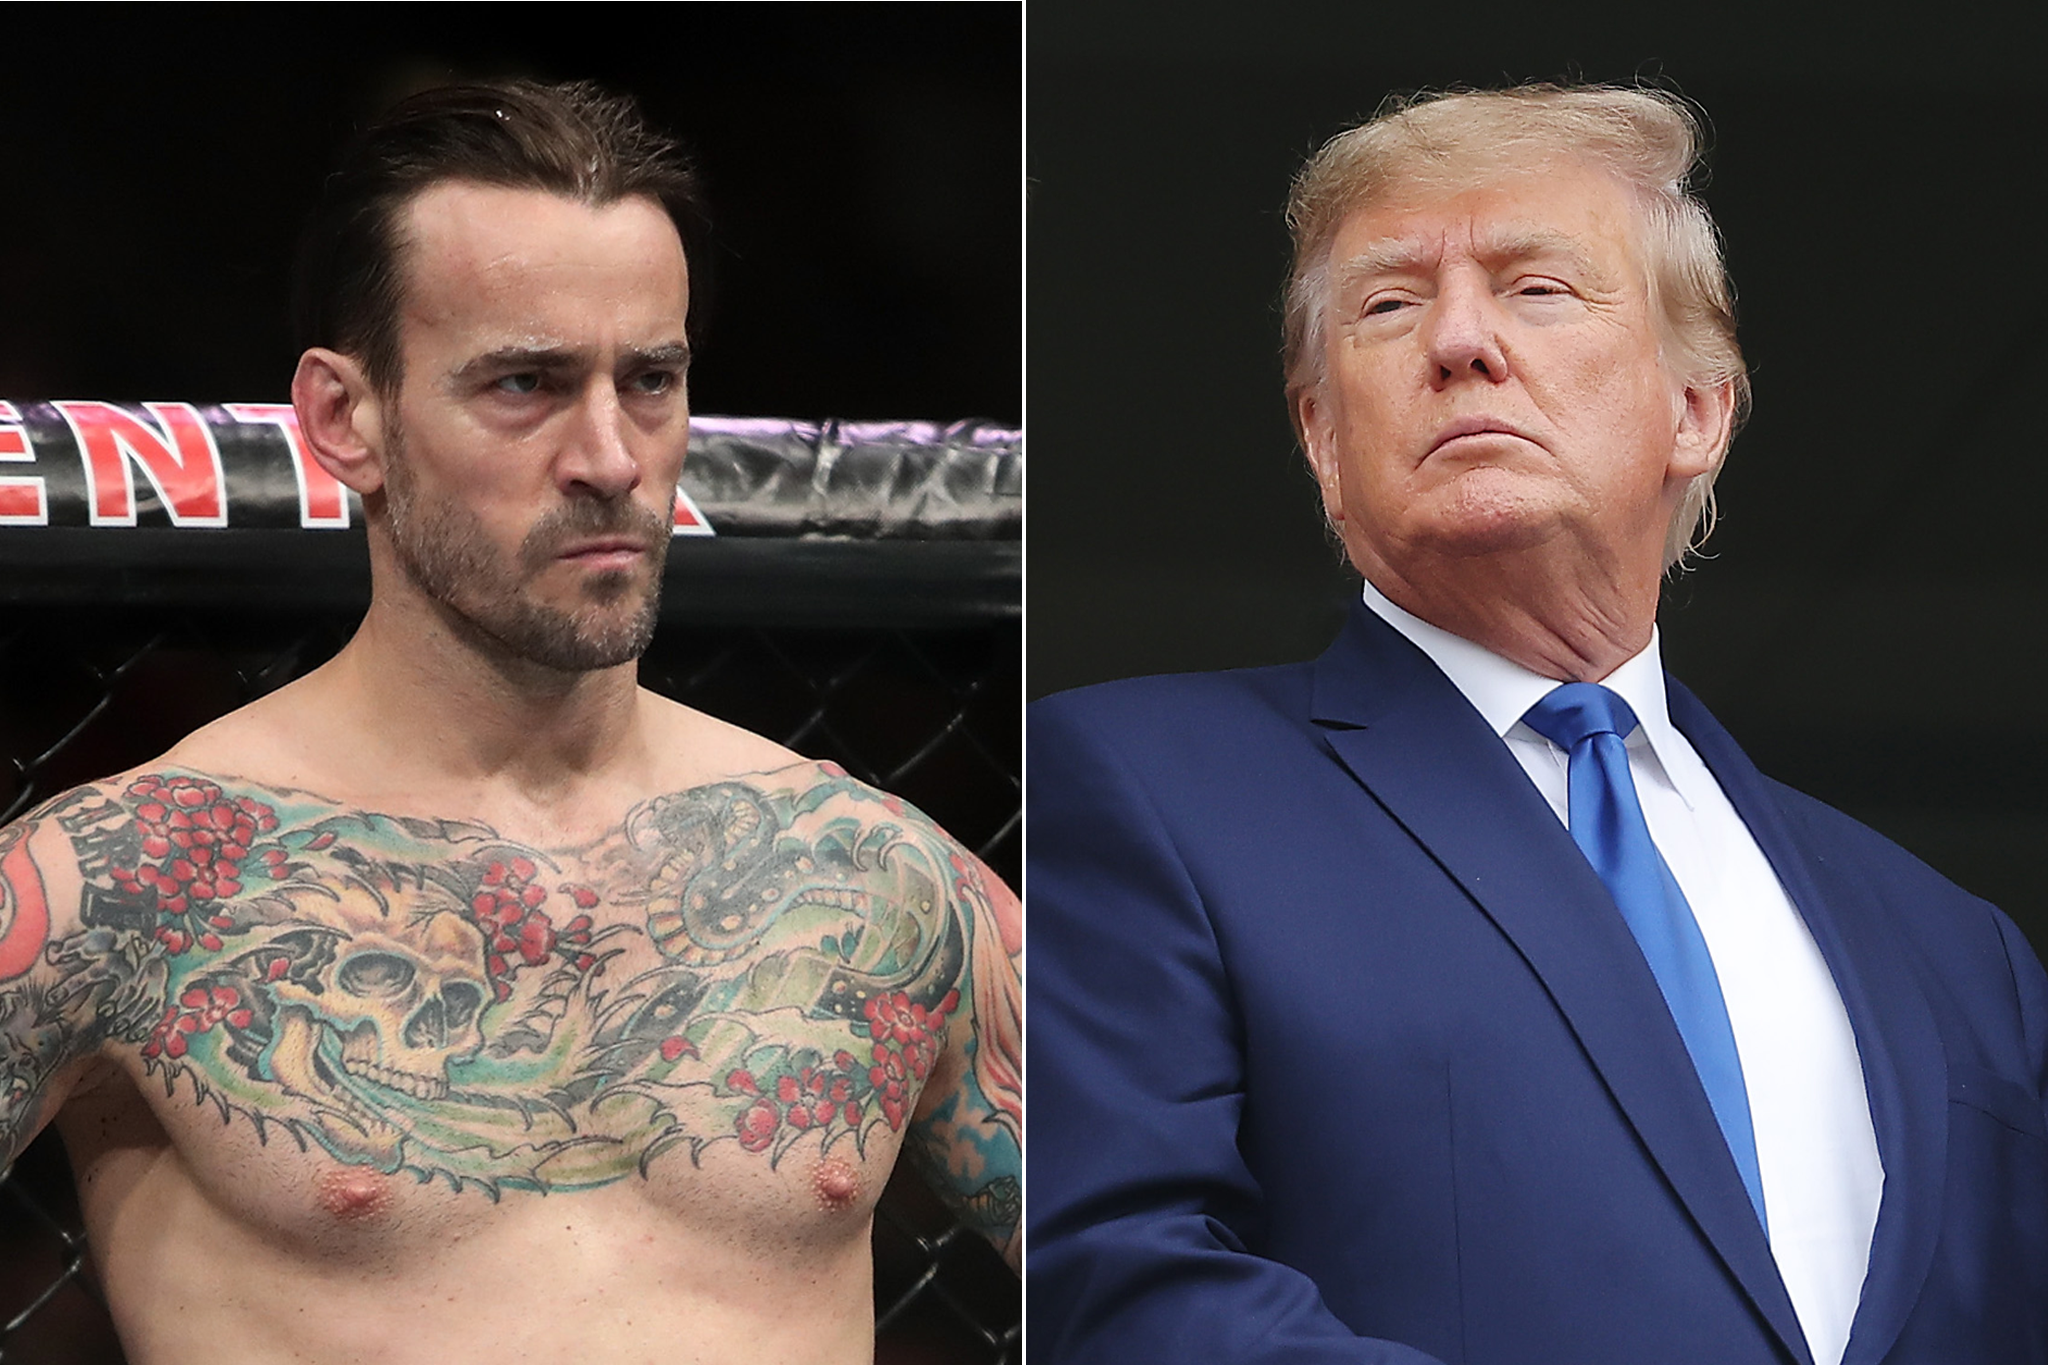 Punk and Trump are among several prominent men who finally got their just desserts this year